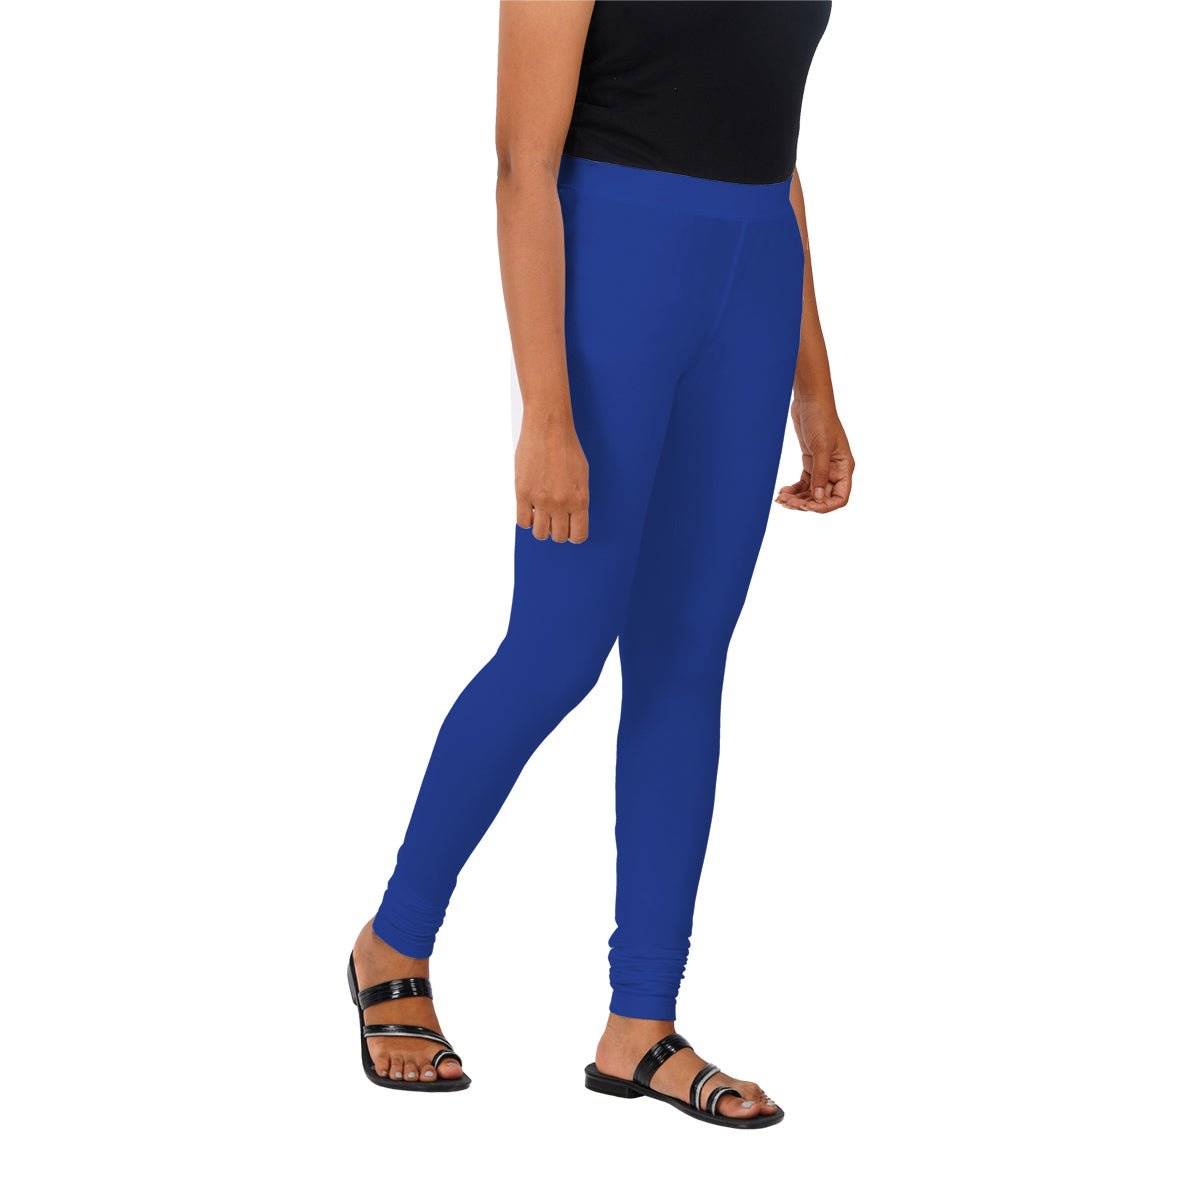 Poomer #Brandedleggins #Clothing Feel all day comfort Premium leggins at  just Rs.360/- available in multi colours Log on to CostKing